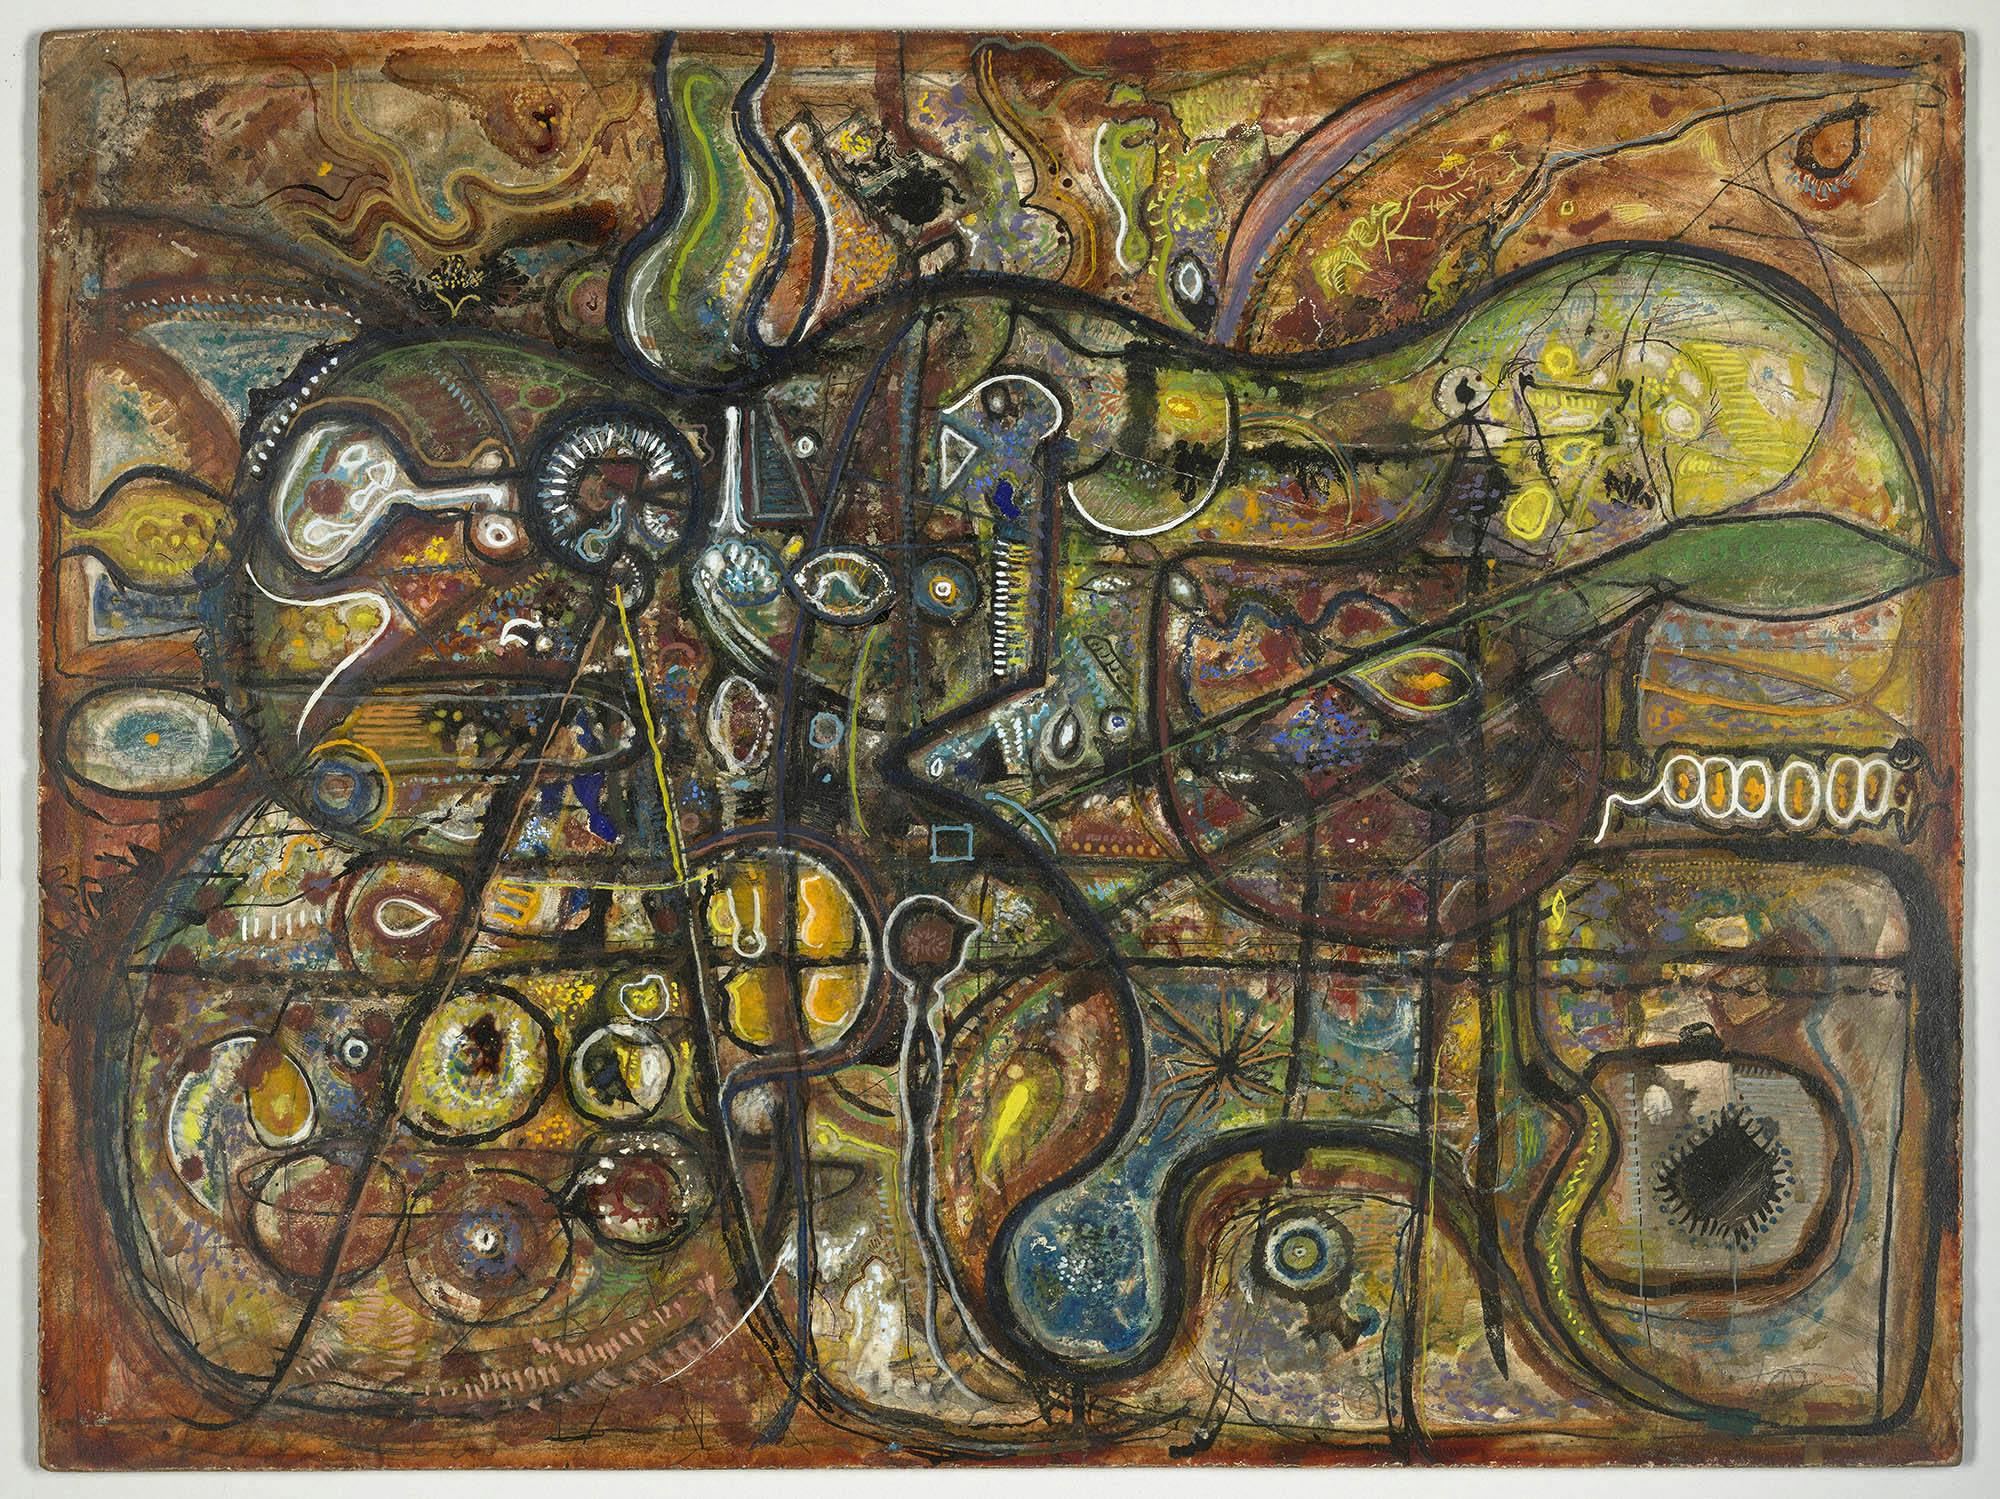 Passacaglia
1941–42
Watercolor and oil on gesso board
18 x 24 in. (45.7 x 61 cm)
The Morgan Library & Museum, New York
 – The Richard Pousette-Dart Foundation